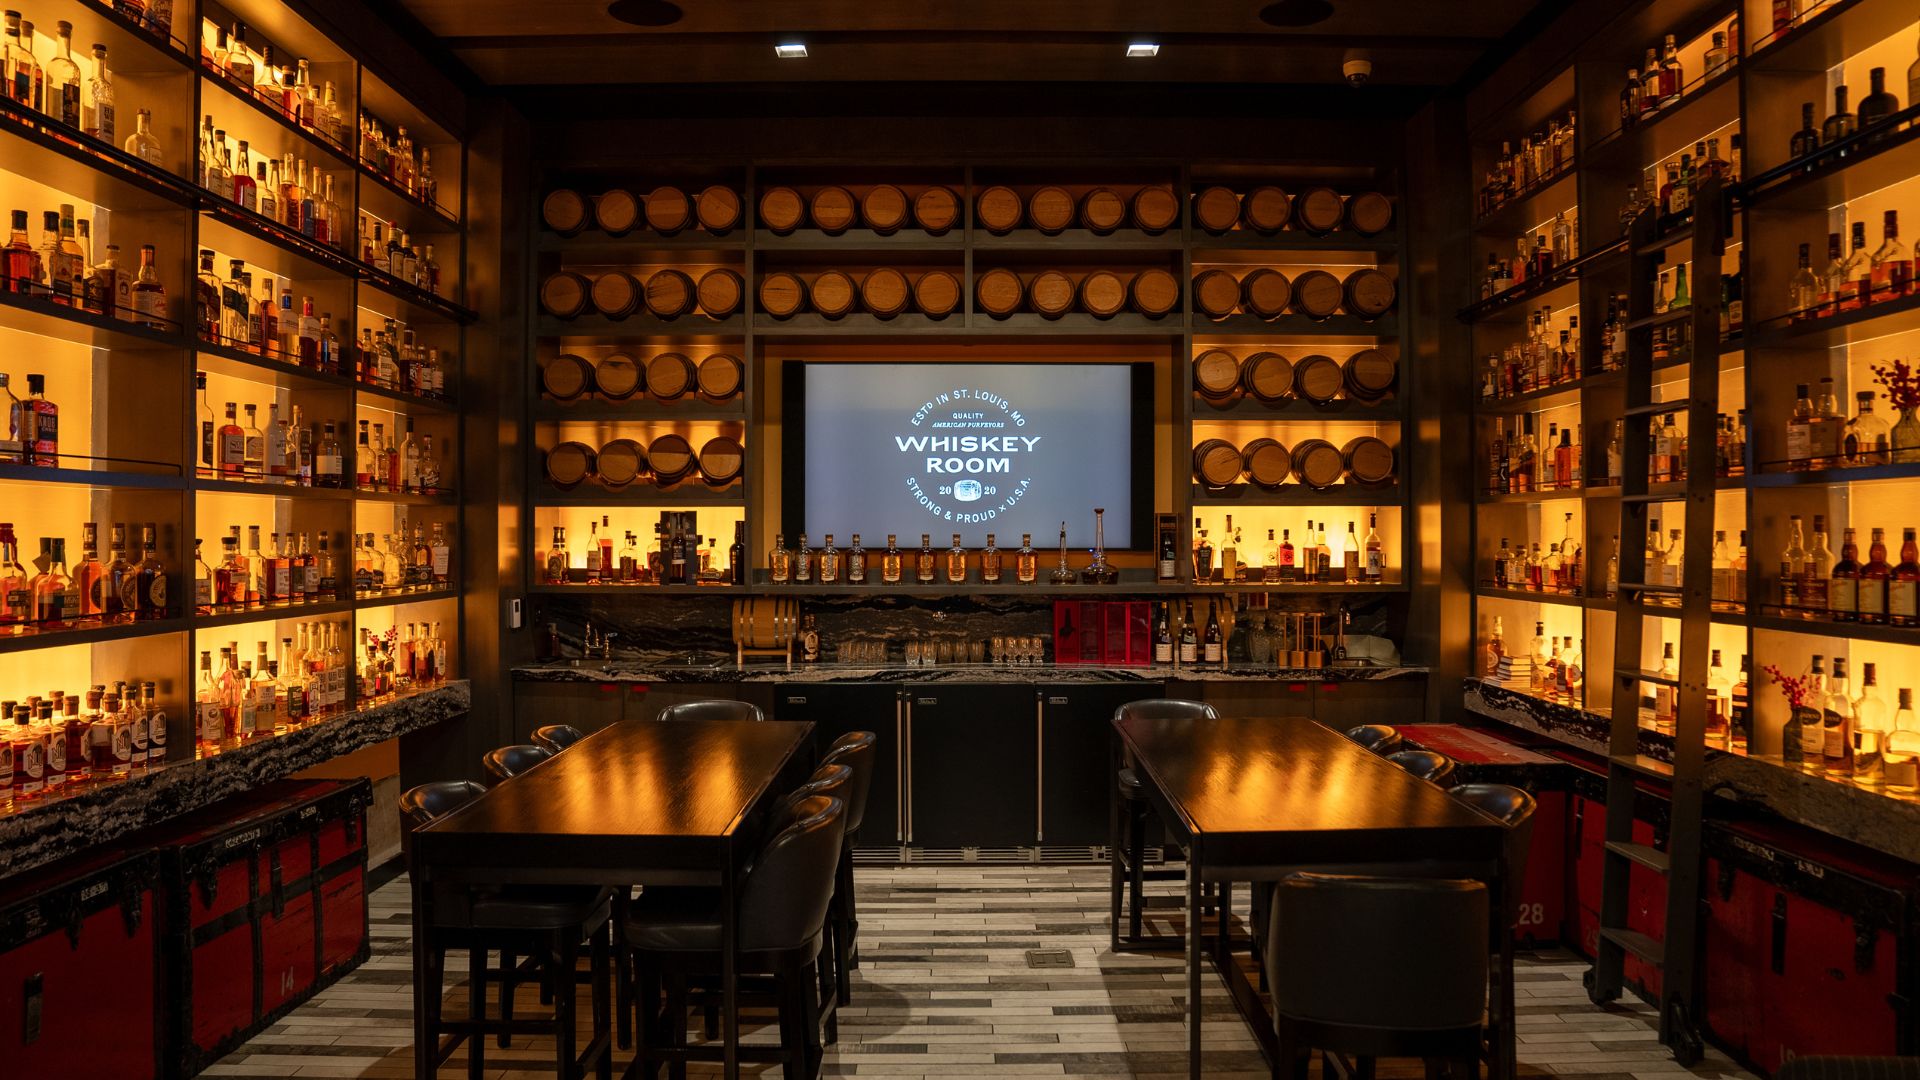 The Whiskey Room boasts 480 curated bottles of whiskey and bourbon.